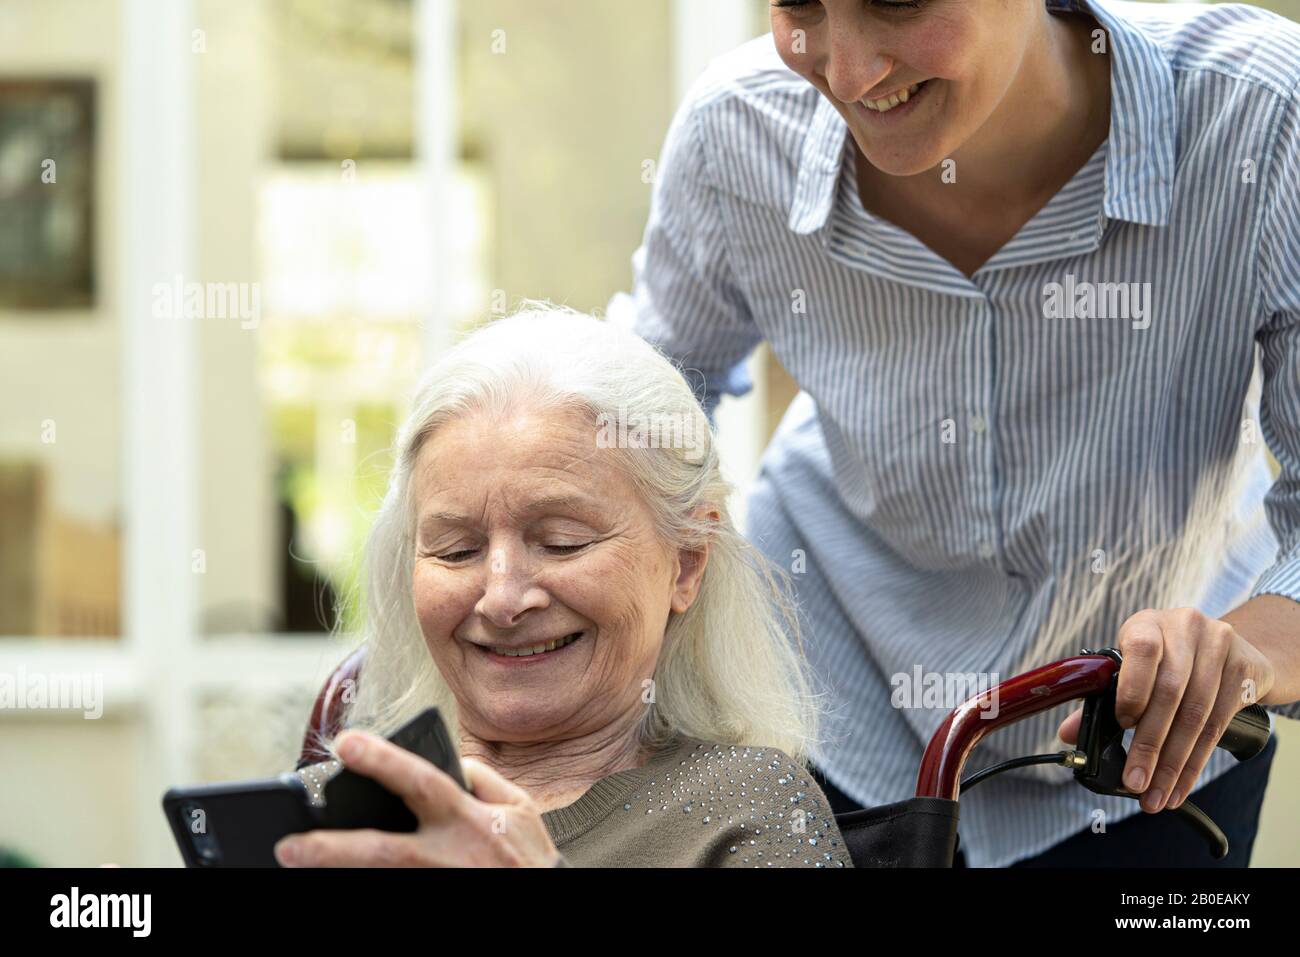 Senior female patient showing mobile phone to young home carer Stock Photo